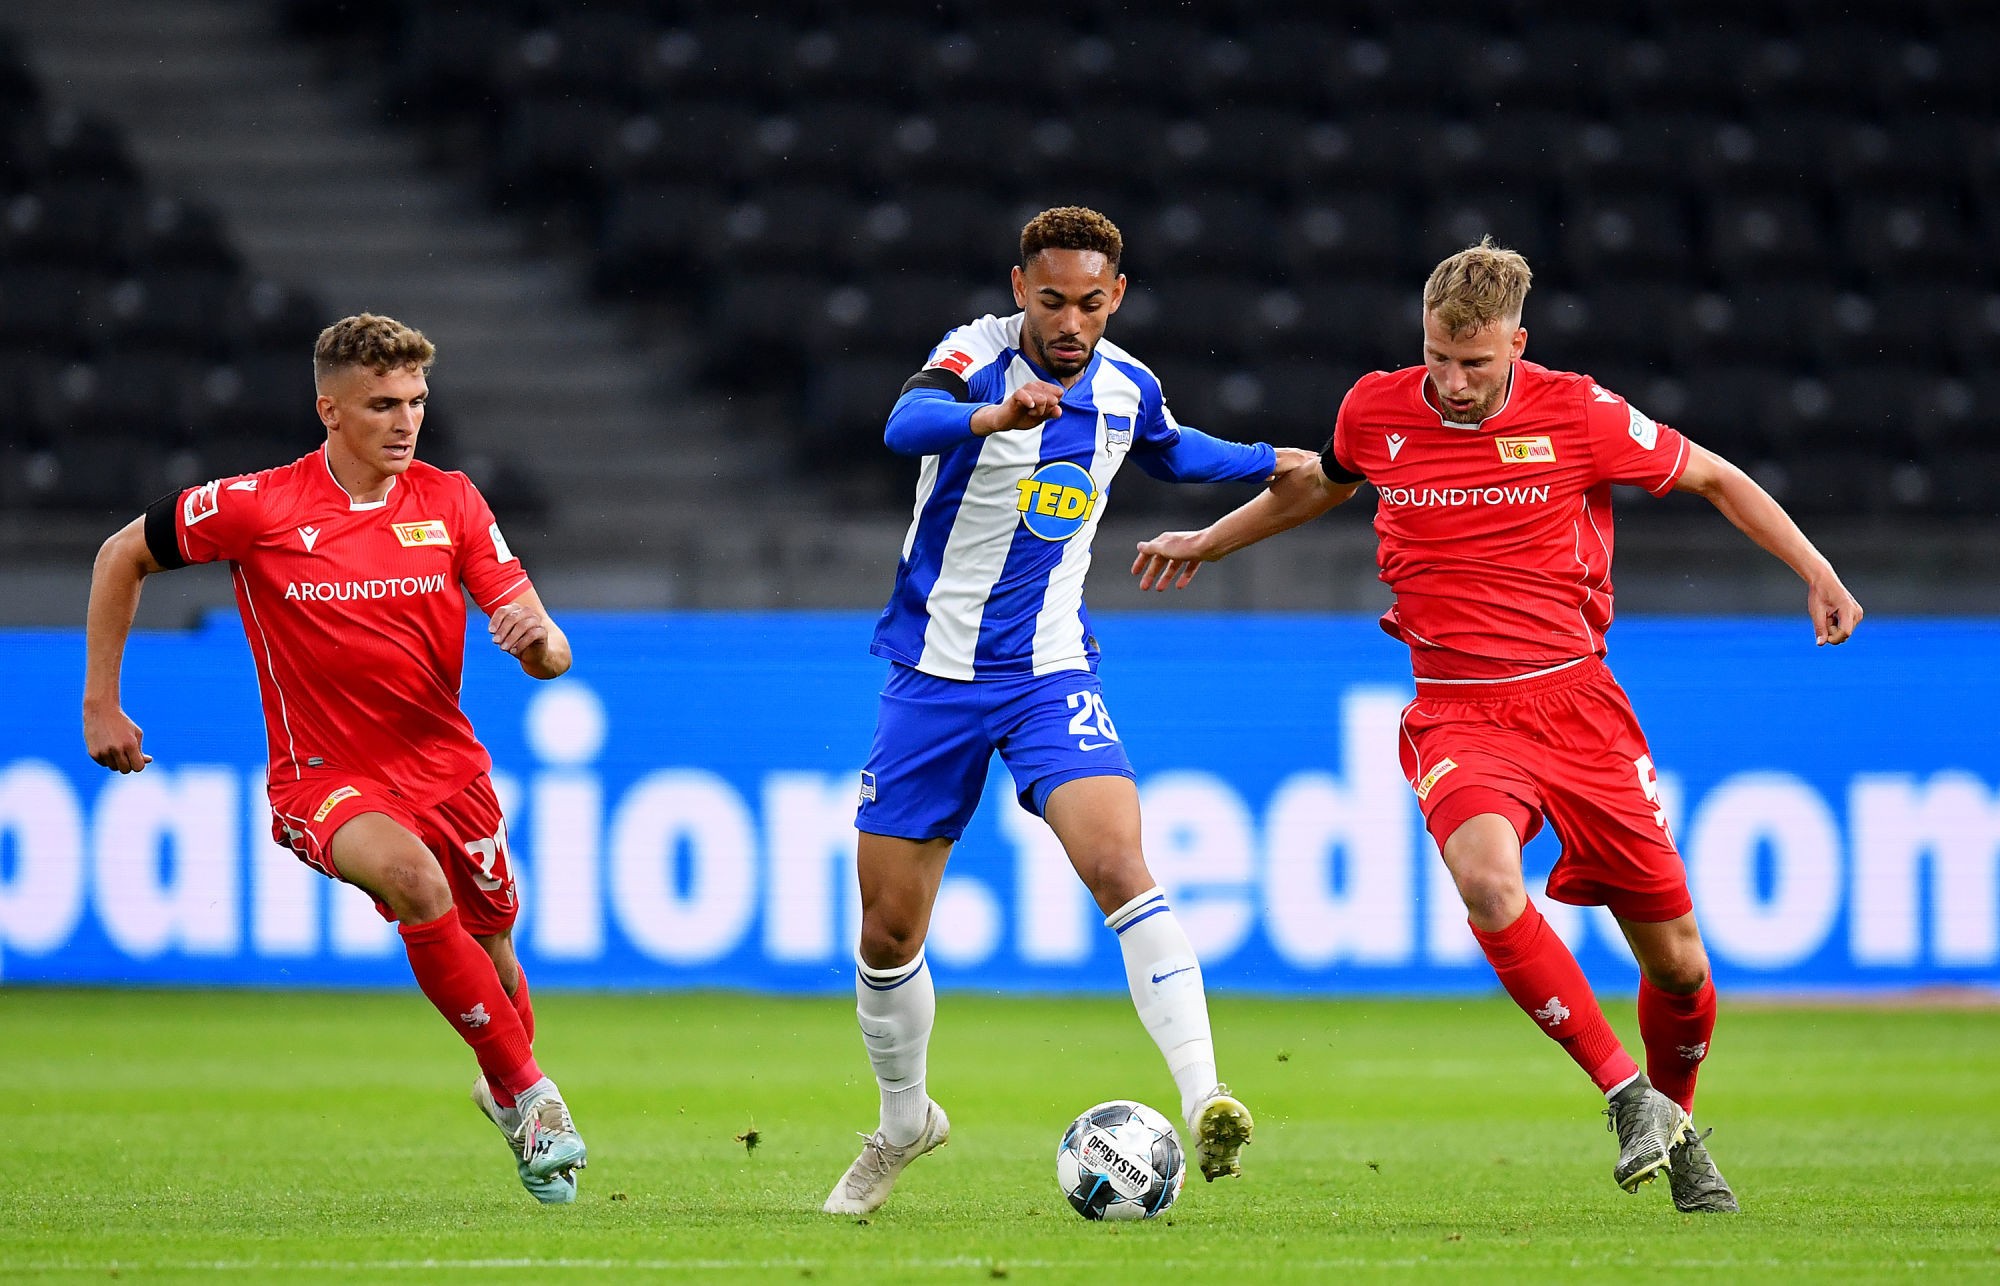 22 May 2020, Berlin: Football: Bundesliga, Hertha BSC - 1 FC Union Berlin, 27th matchday in the Olympic Stadium. Herthas Matheus Cunha (M) in a duel with Unions Grischa Prömel (l) and Marvin Friedrich. Photo: Stuart Franklin/Getty Images Europe/Pool/dpa - only for use in accordance with contractual agreement 
Photo by Icon Sport - Marvin FRIEDRICH - Matheus CUNHA - Grischa PROMEL - Olympiastadion - Berlin (Allemagne)